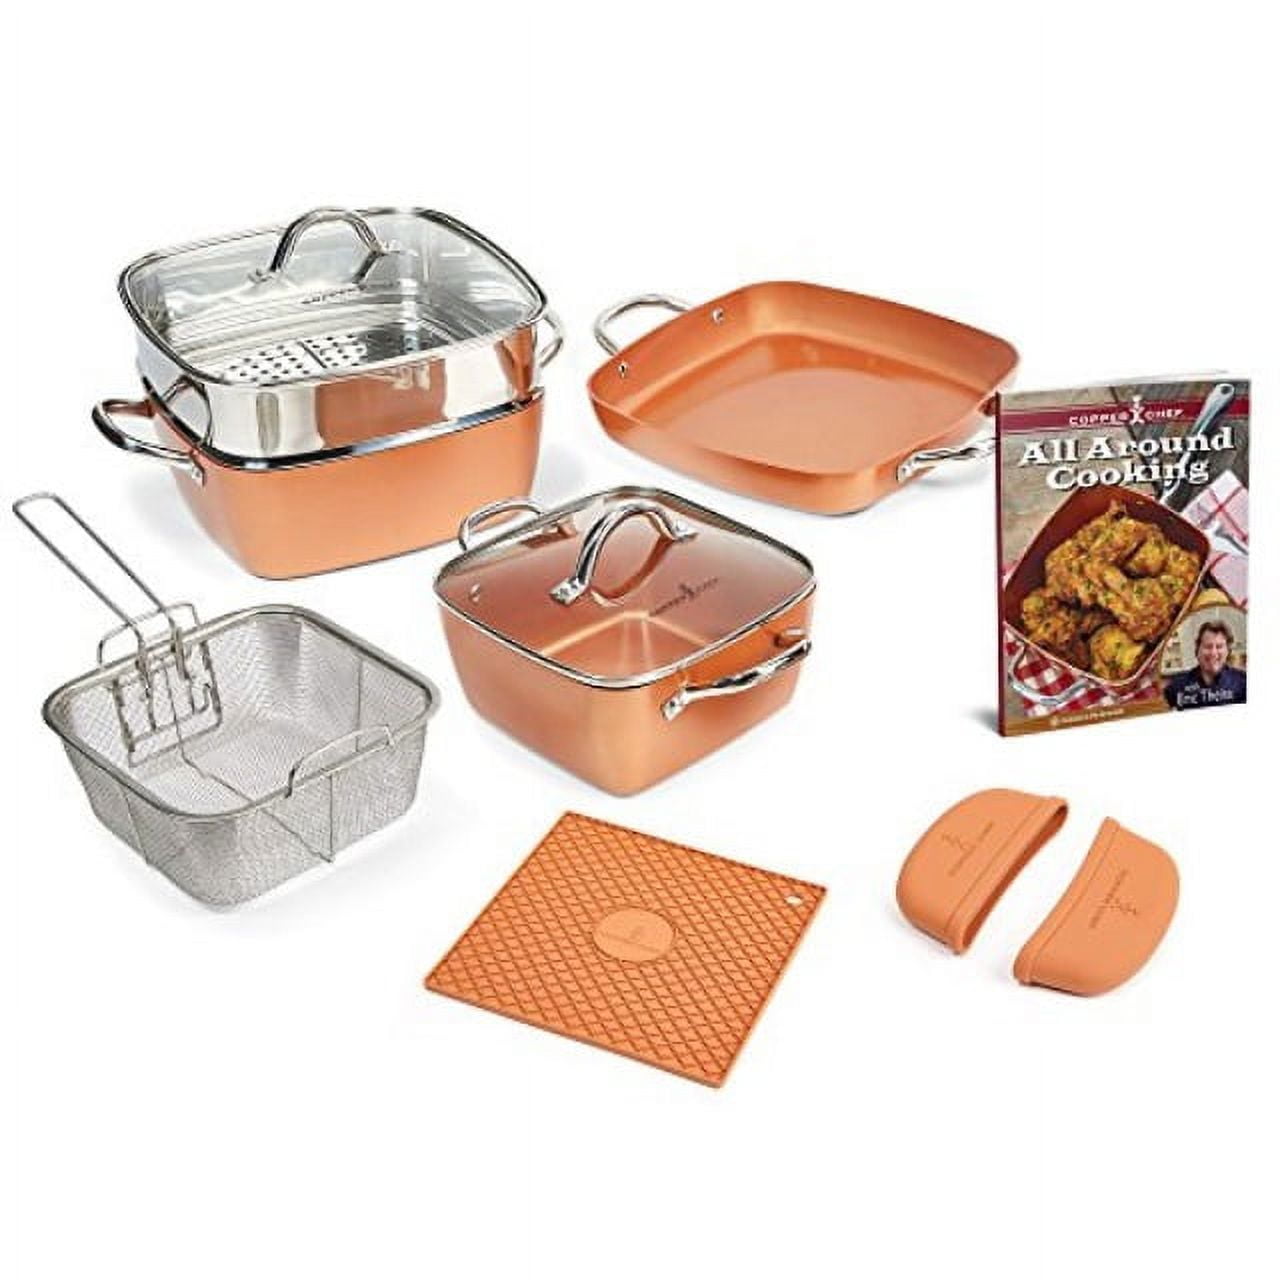 Copper Chef pot and pan set - household items - by owner - housewares sale  - craigslist